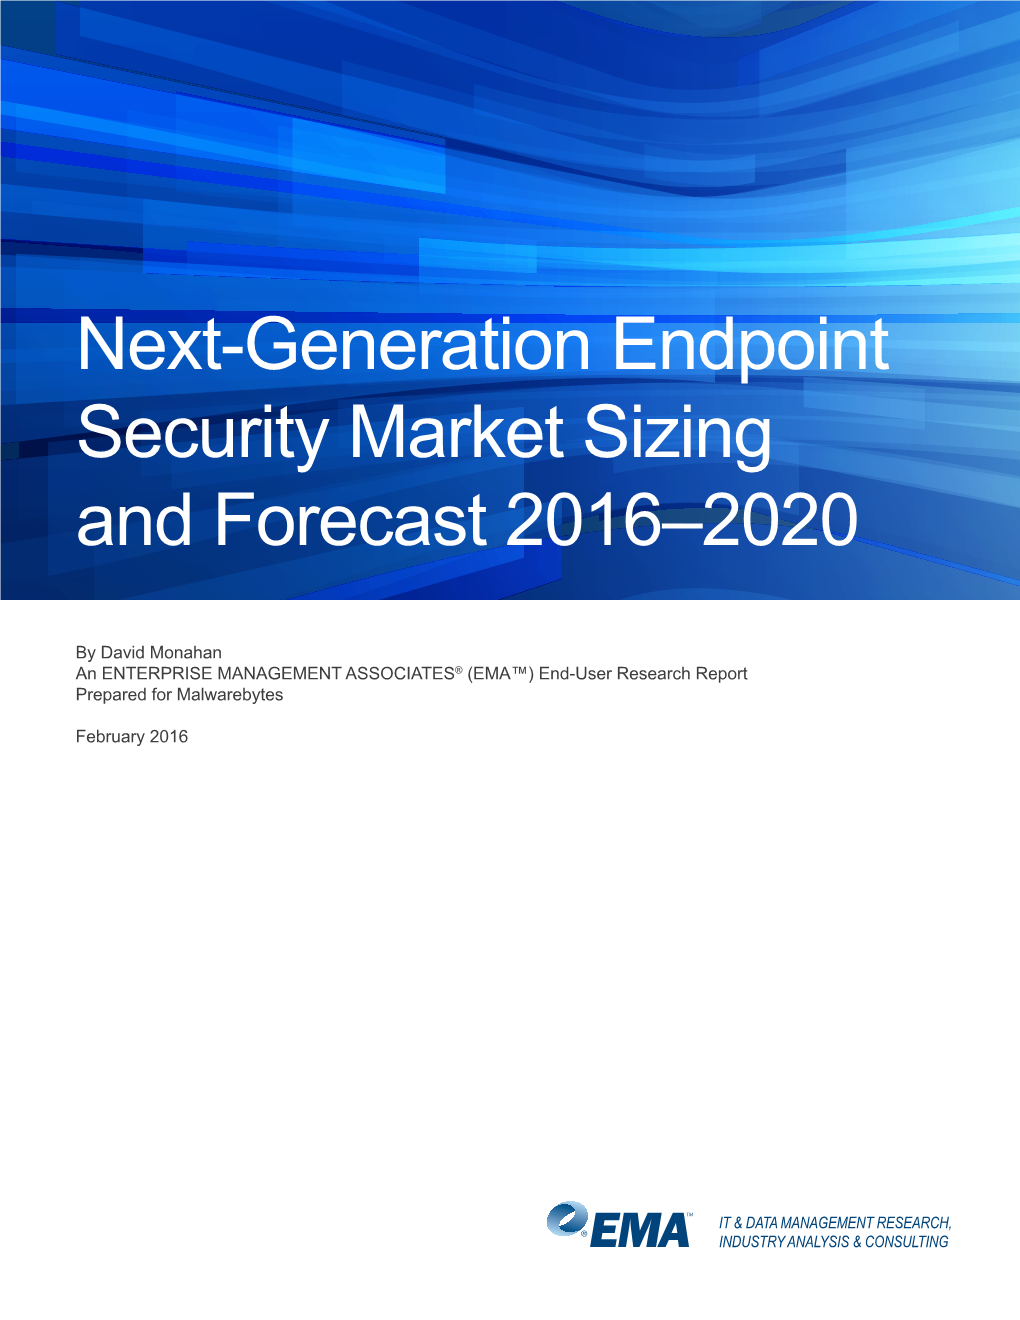 Next-Generation Endpoint Security Market Sizing and Forecast 2016–2020